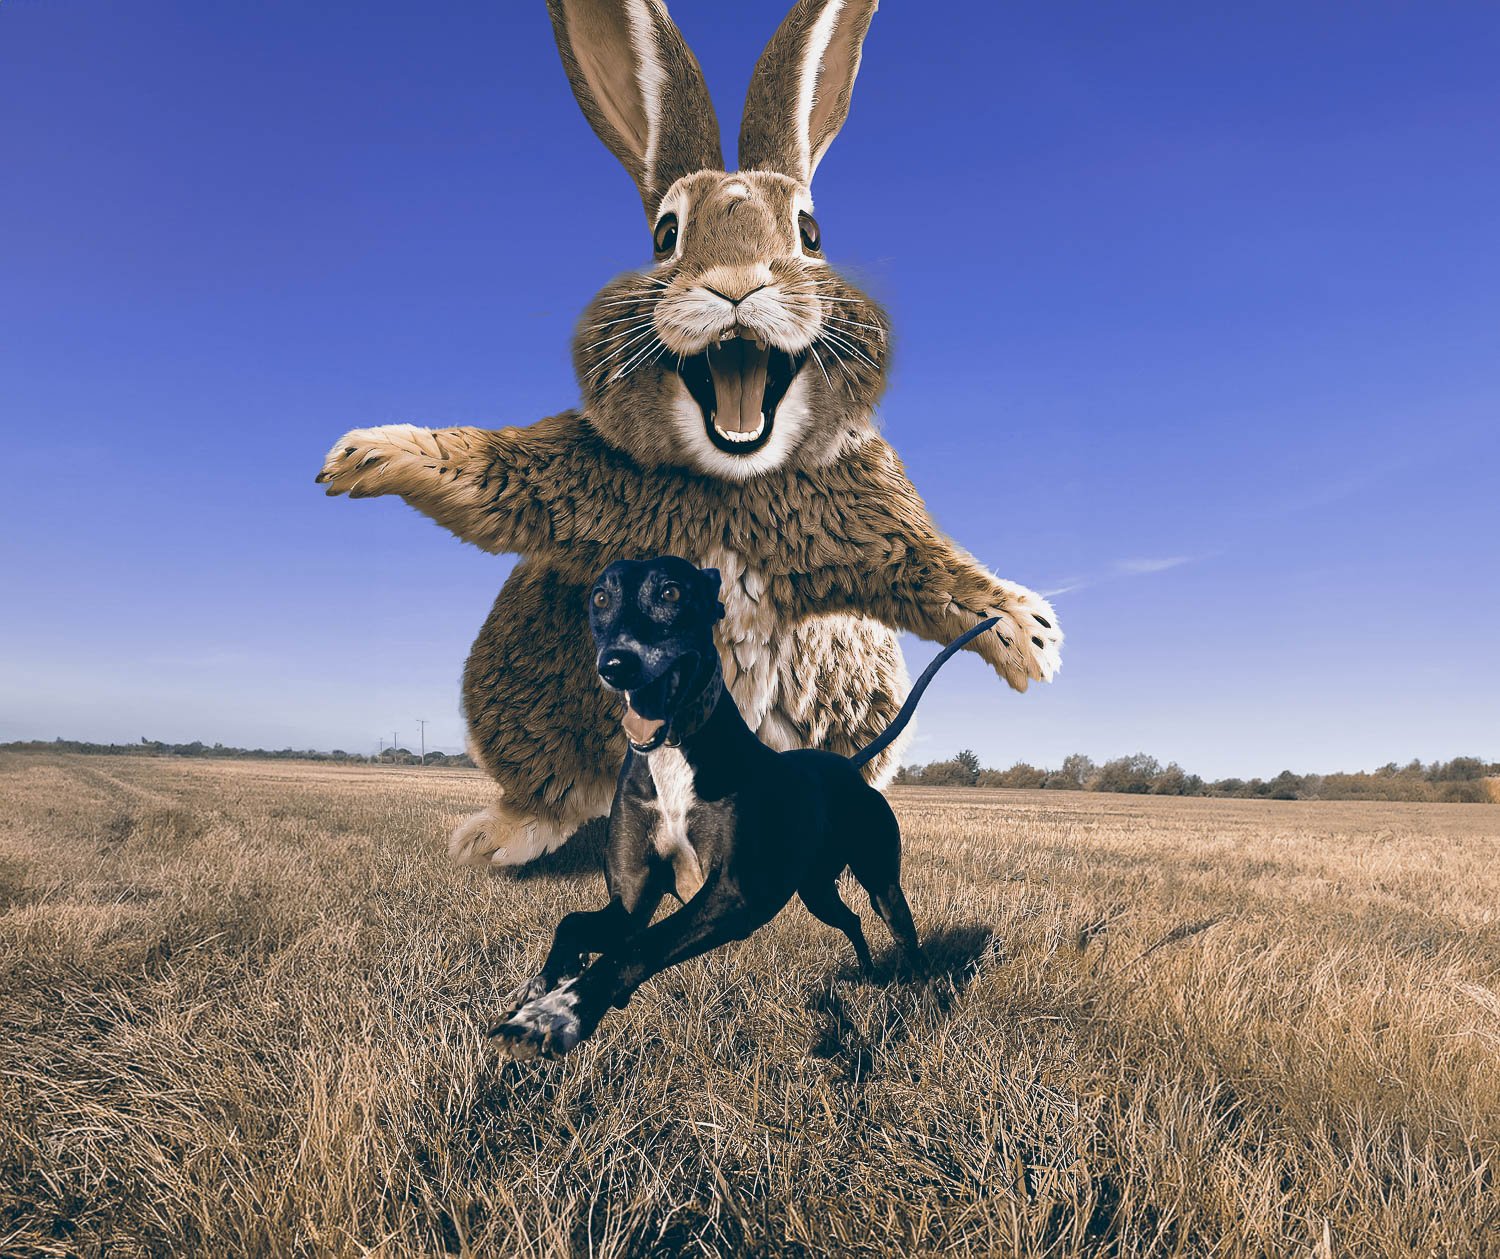 A black Dobermann leaping through a grassy field being chased by a giant rabbit